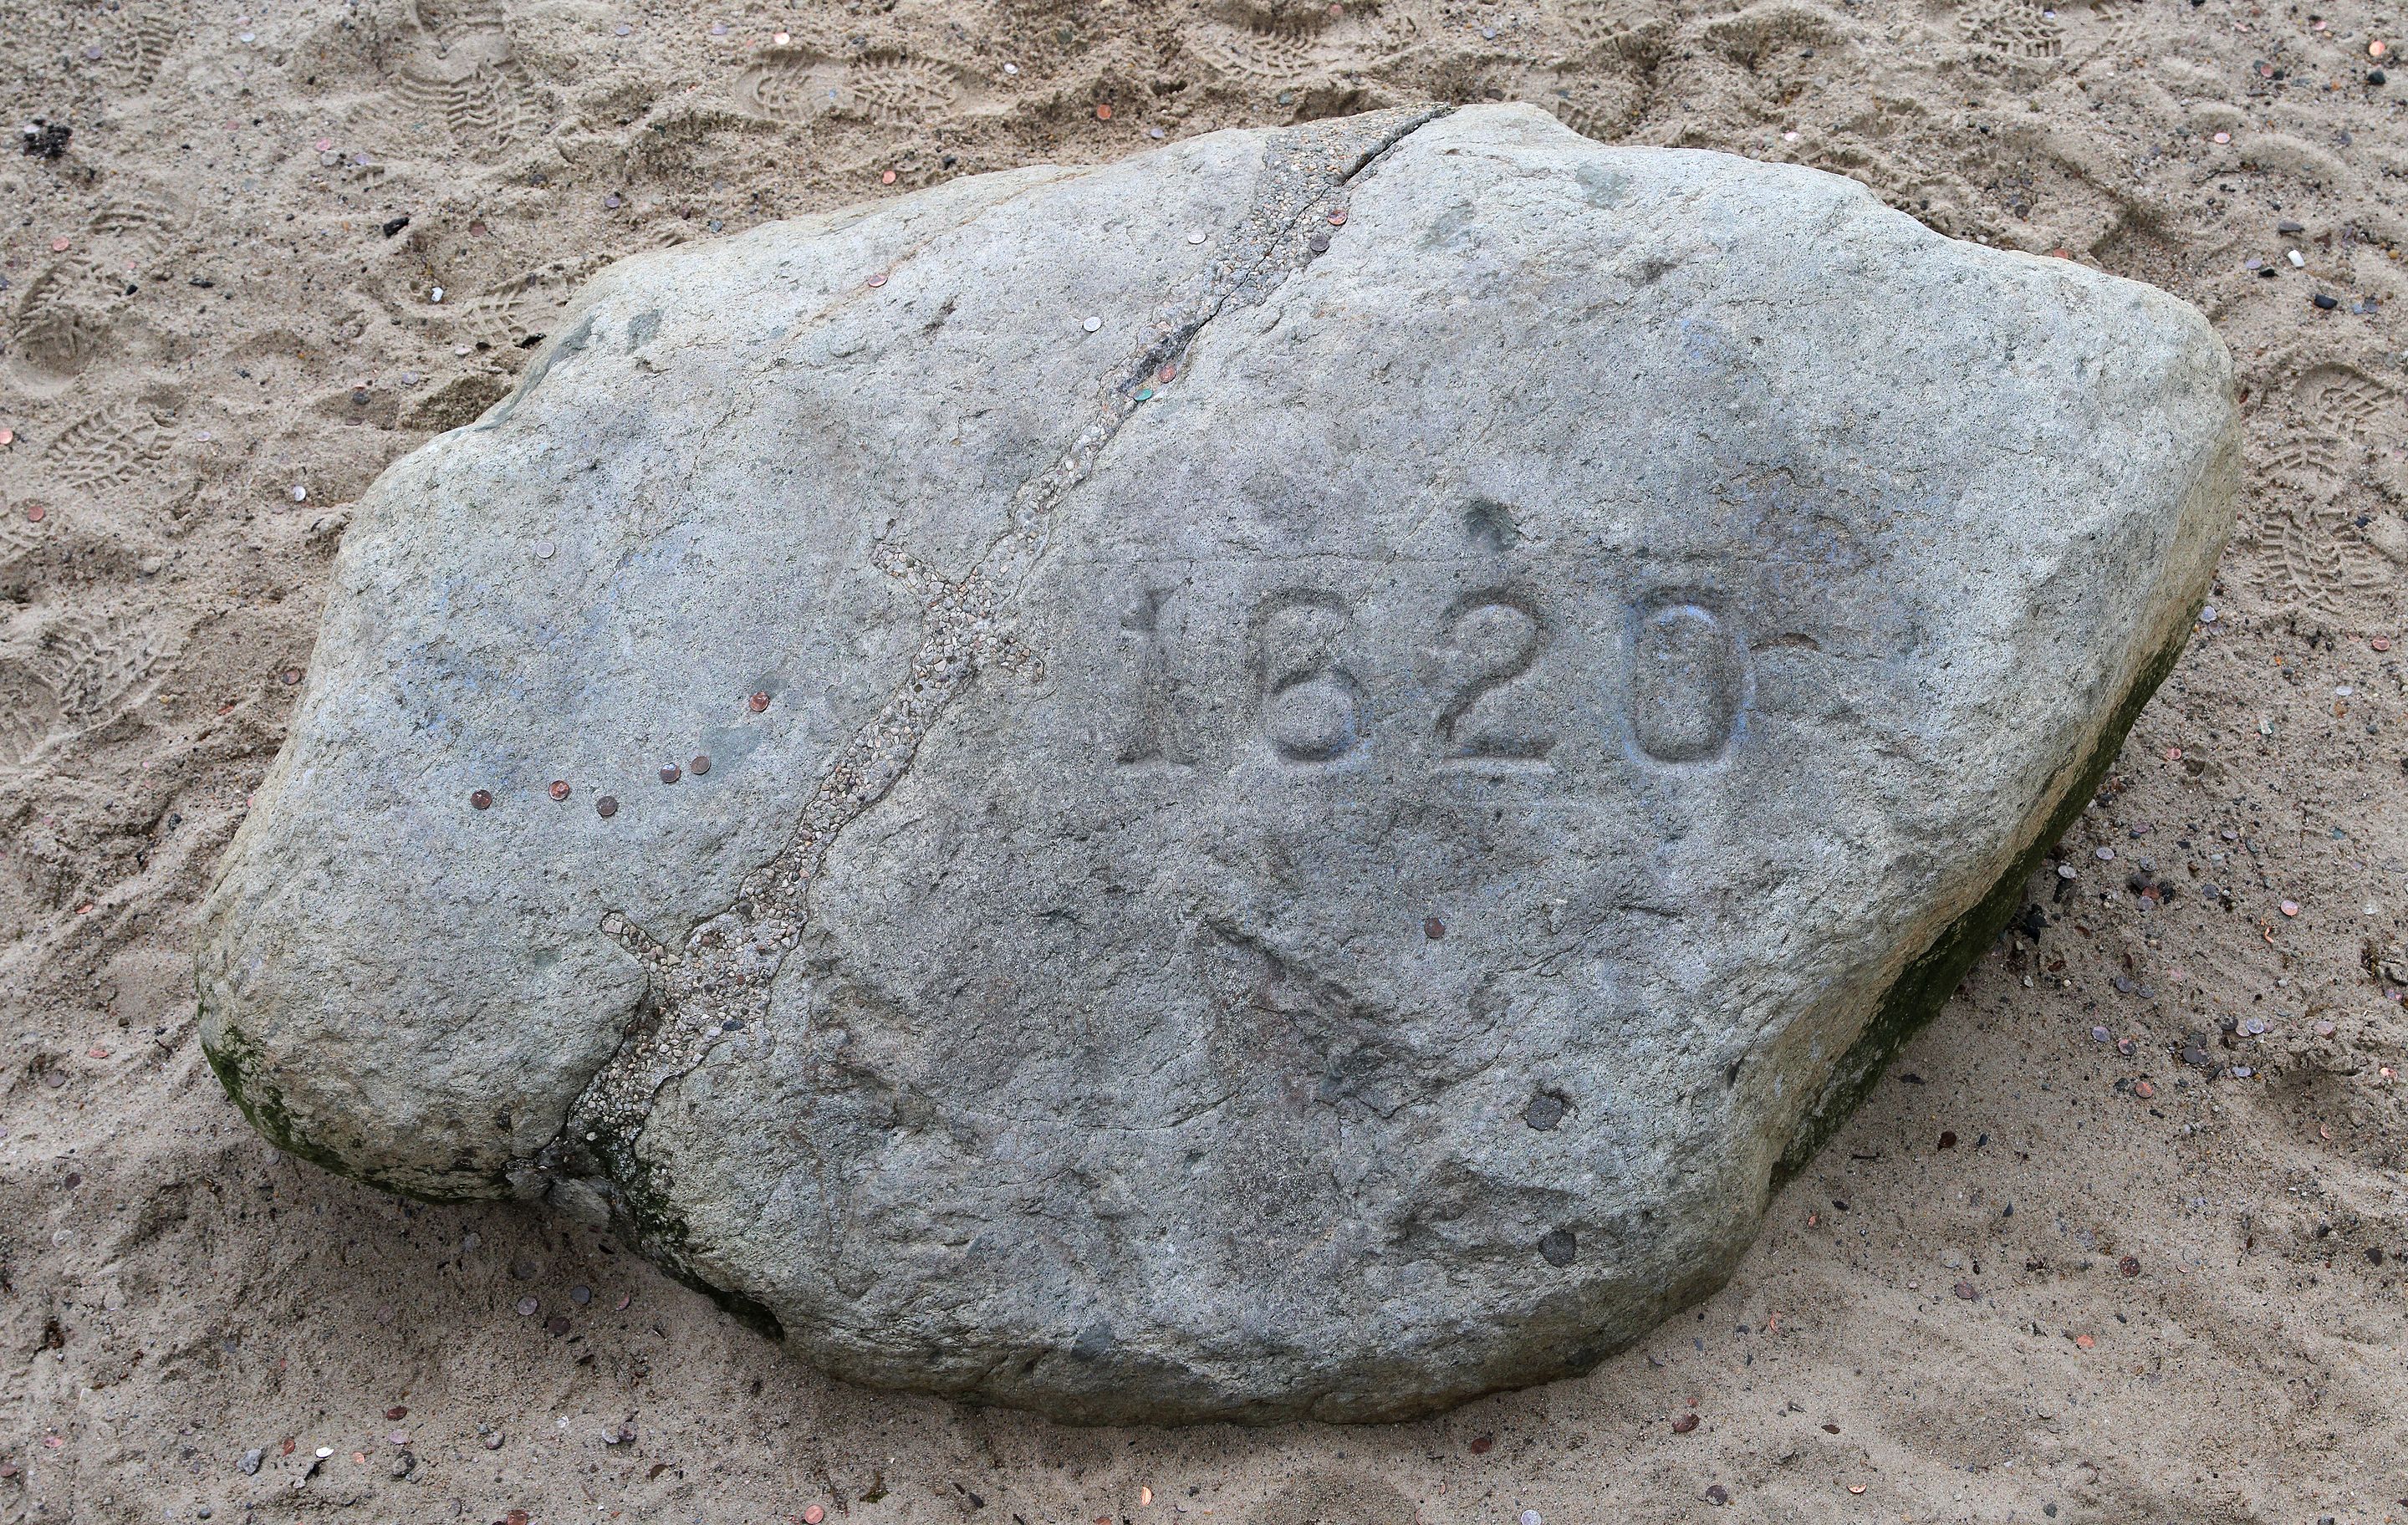 Plymouth Rock in Plymouth, Massachusetts, the traditional site of disembarkation of William Bradford and the Mayflower Pilgrims who founded Plymouth Colony in 1620.jpg